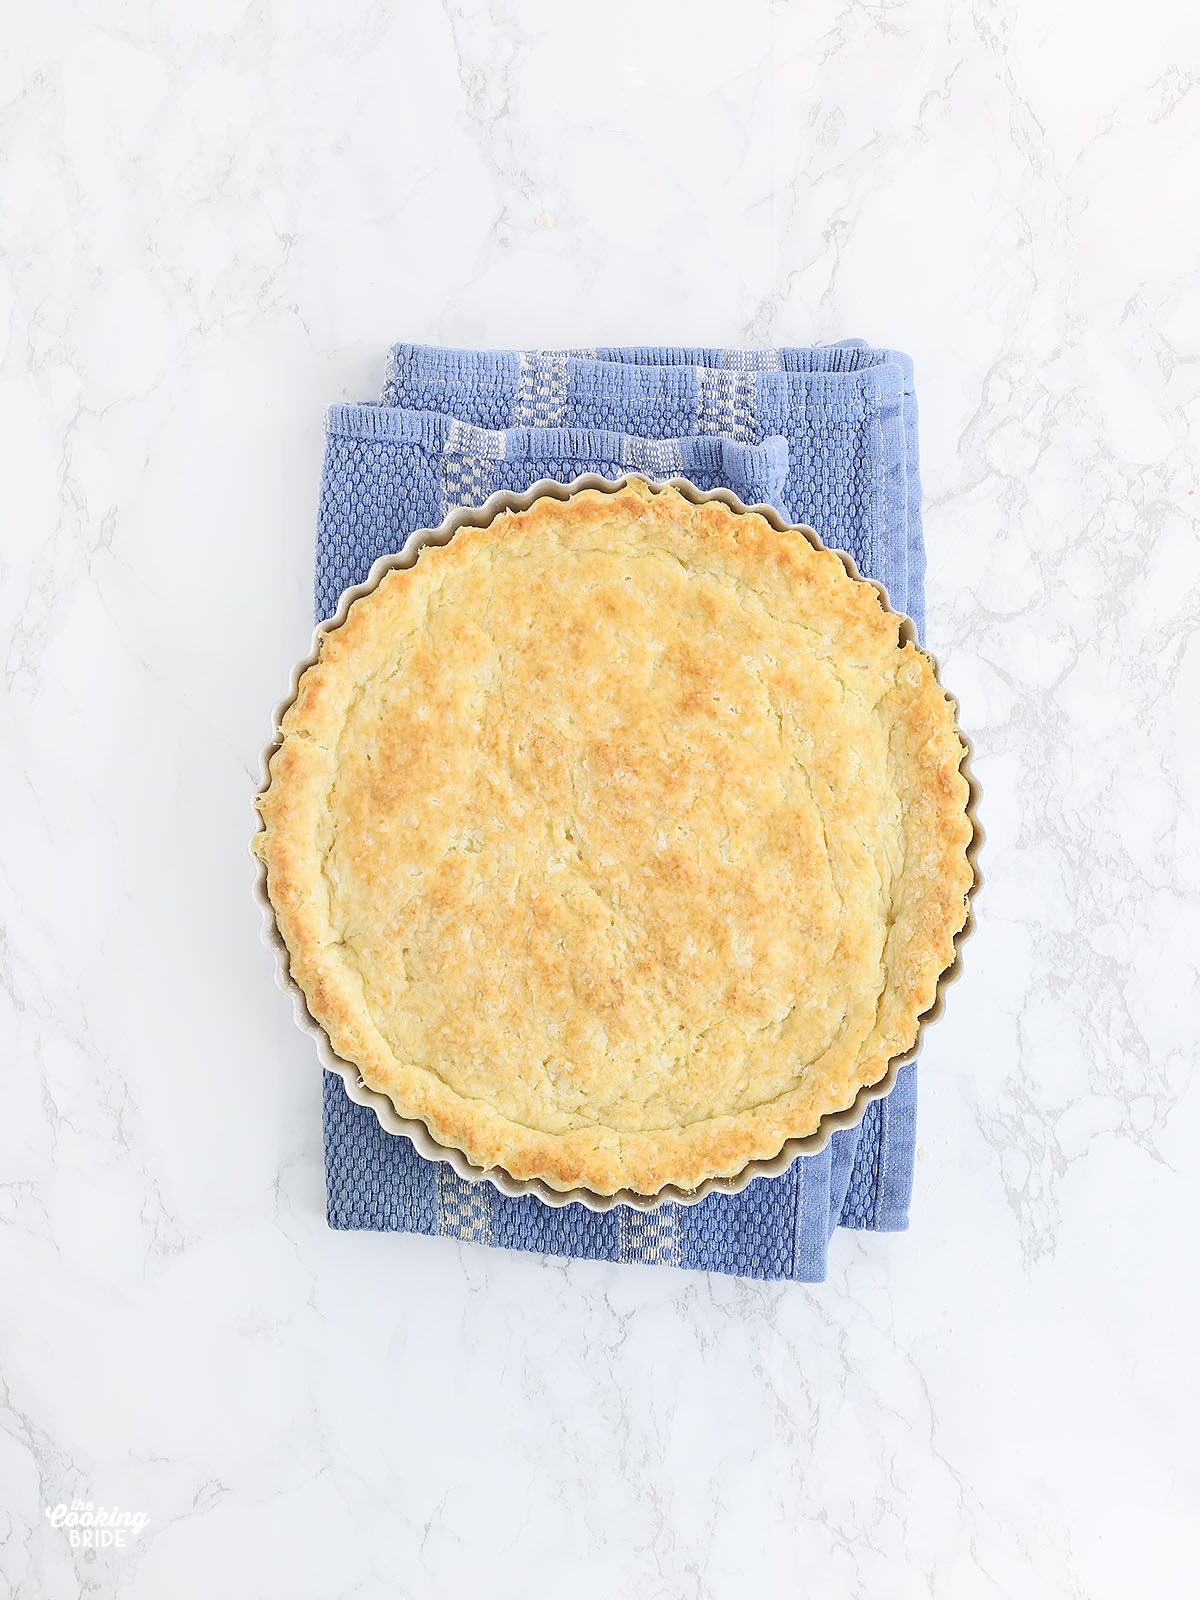 baked buttermilk biscuit crust in a tart pan